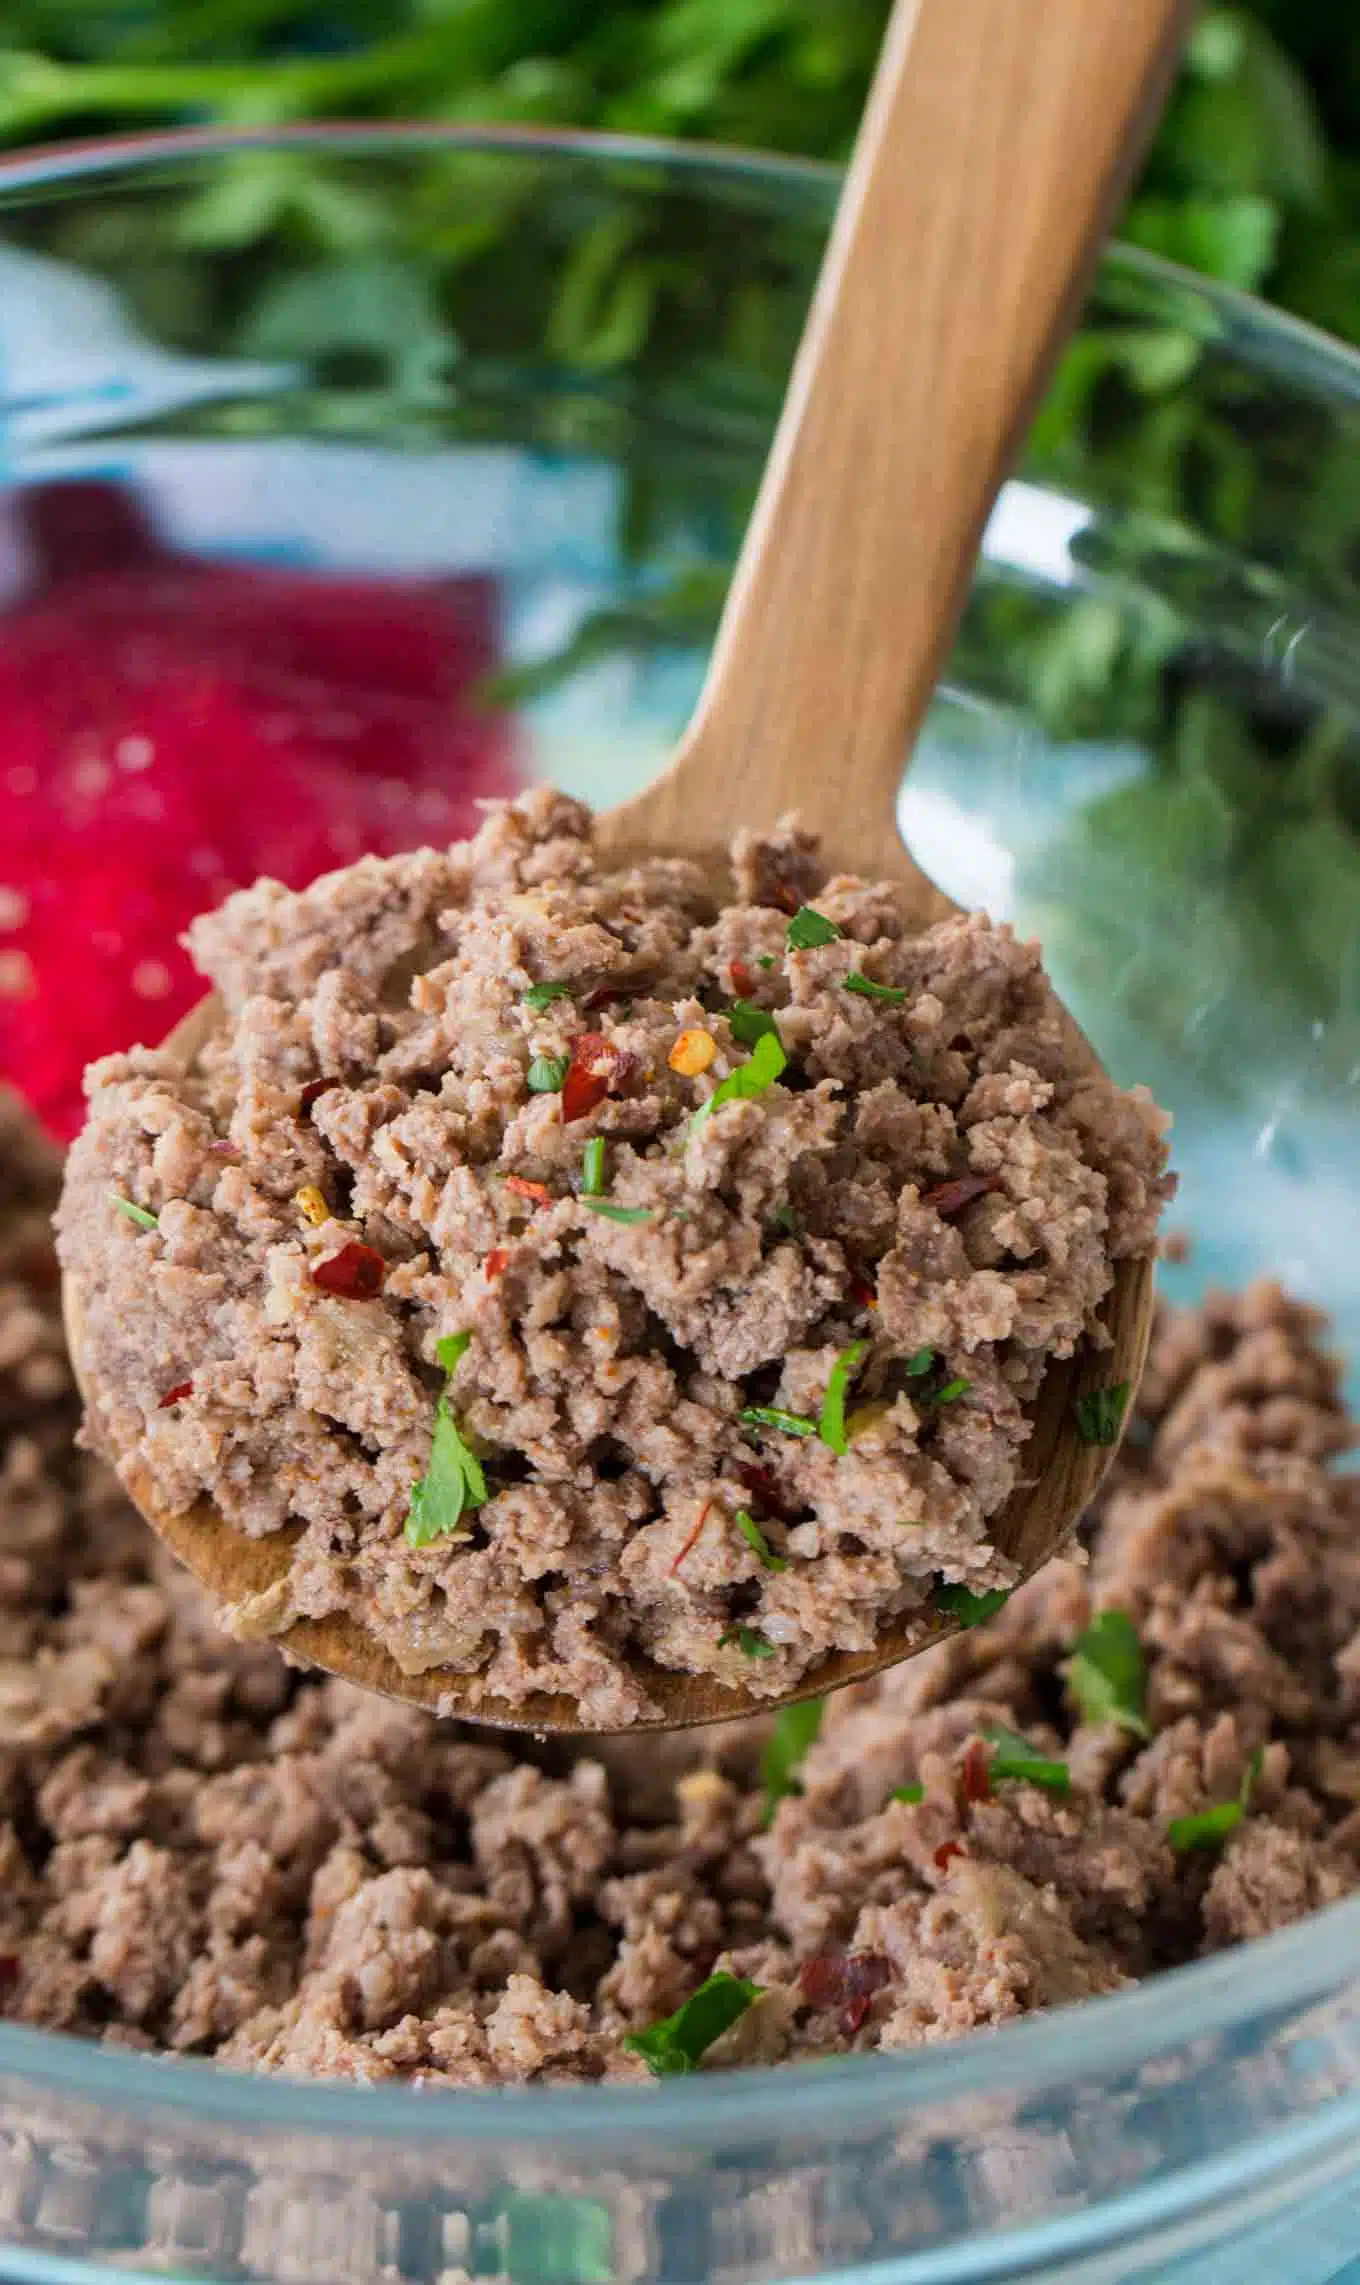 Frozen Ground Beef In Instant Pot Recipe [VIDEO] - Sweet and